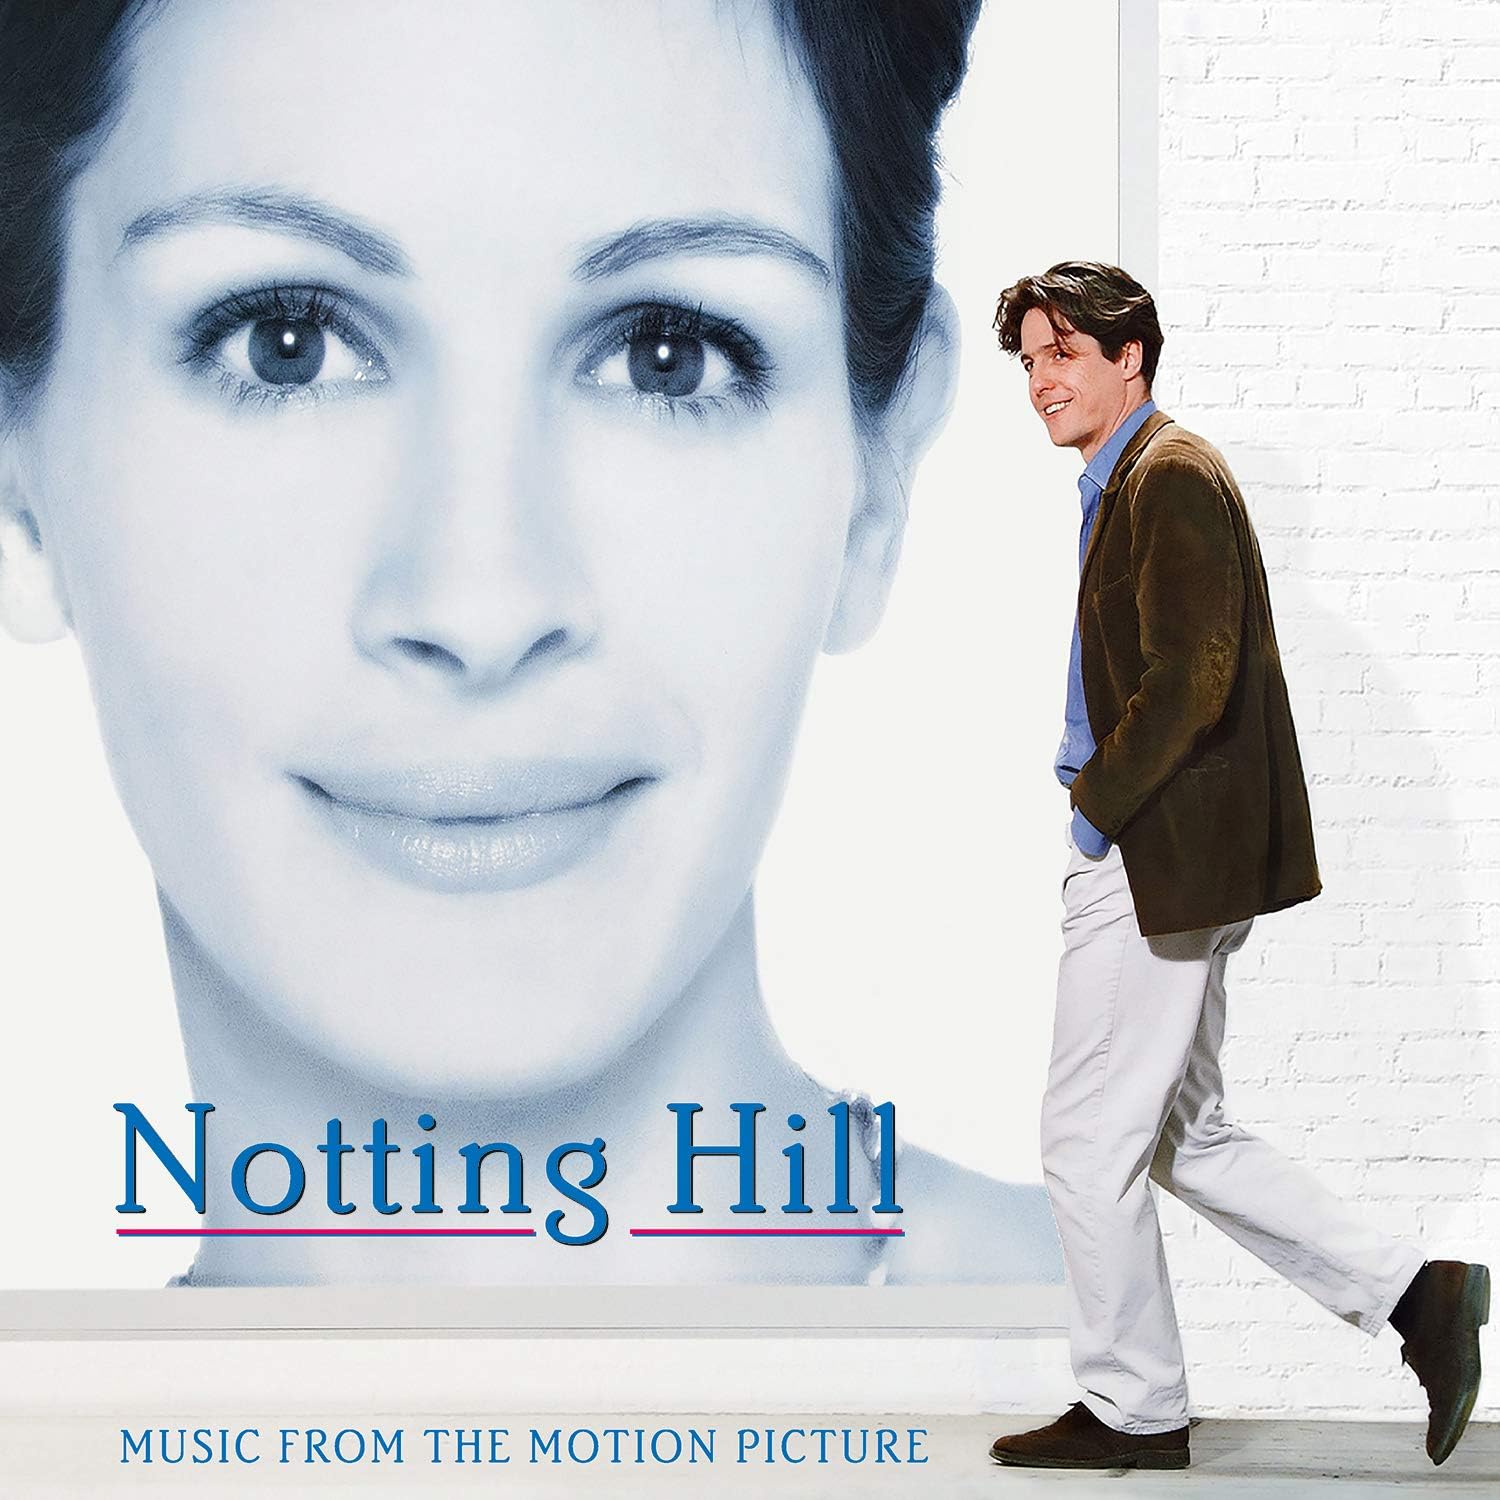 Notting Hill (Music From The Motion Picture) (Vinyl LP)